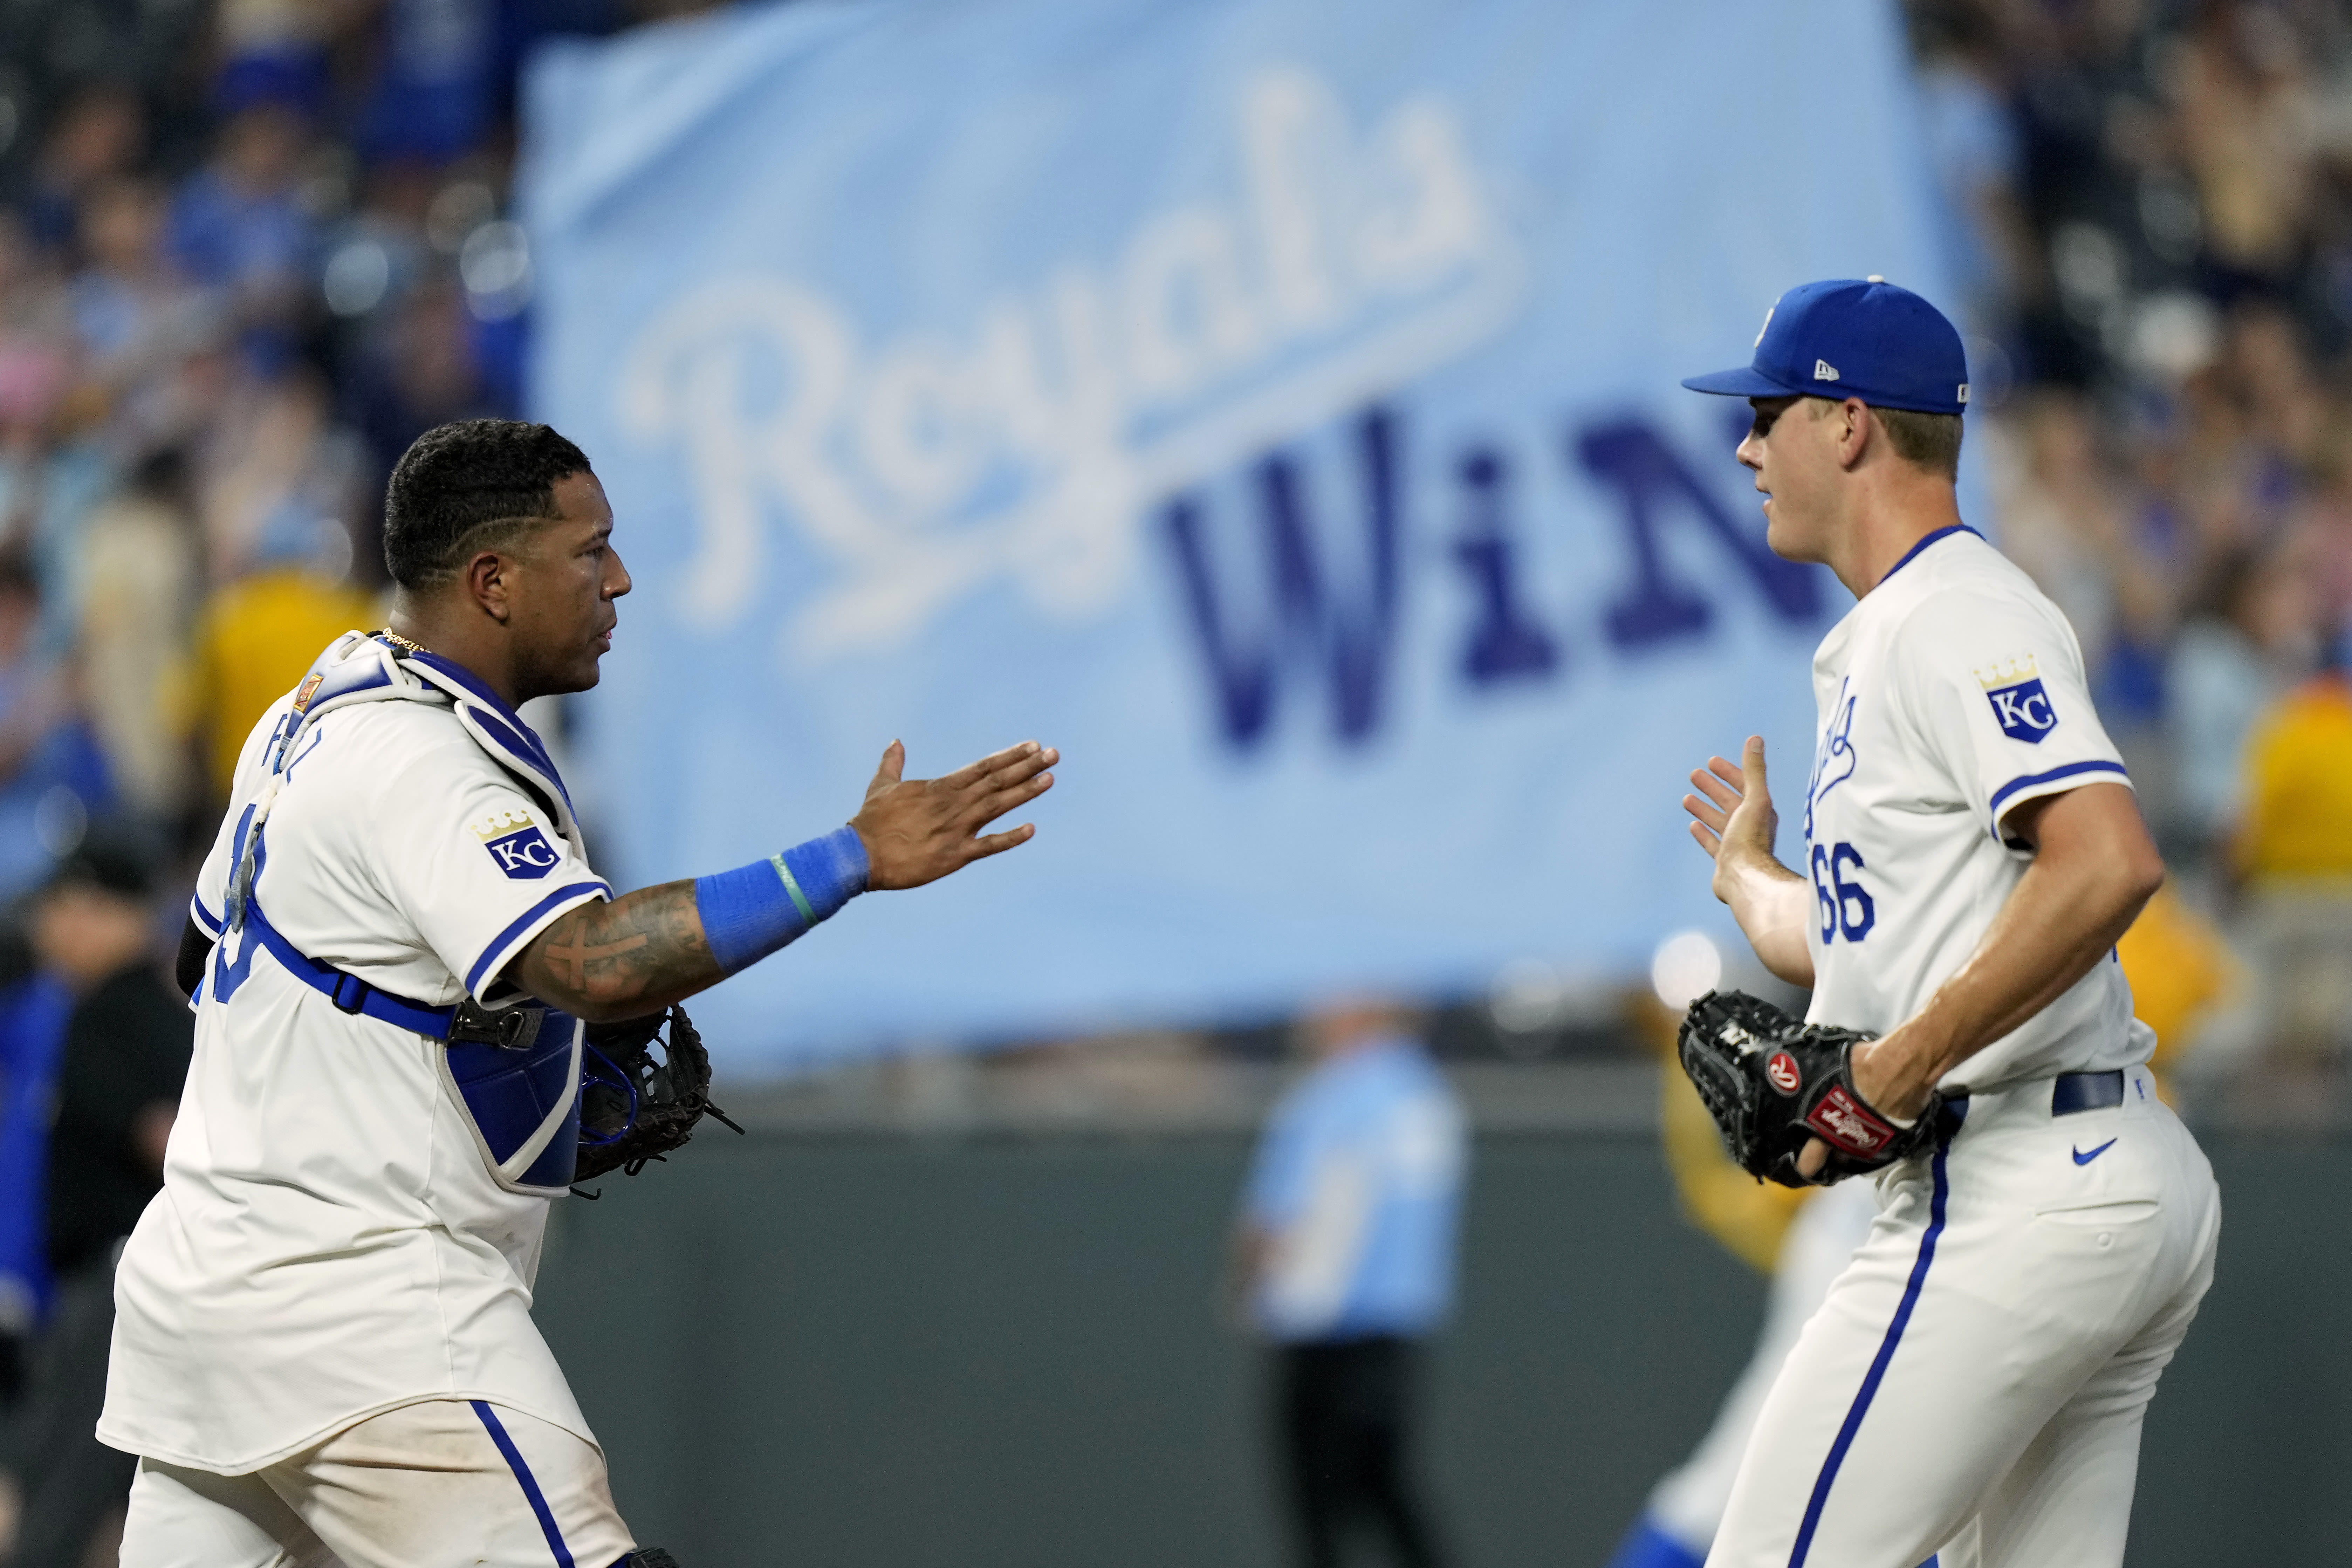 Ragans strikes out 11 as Royals beat Marlins 4-1 for fourth win in 15 games